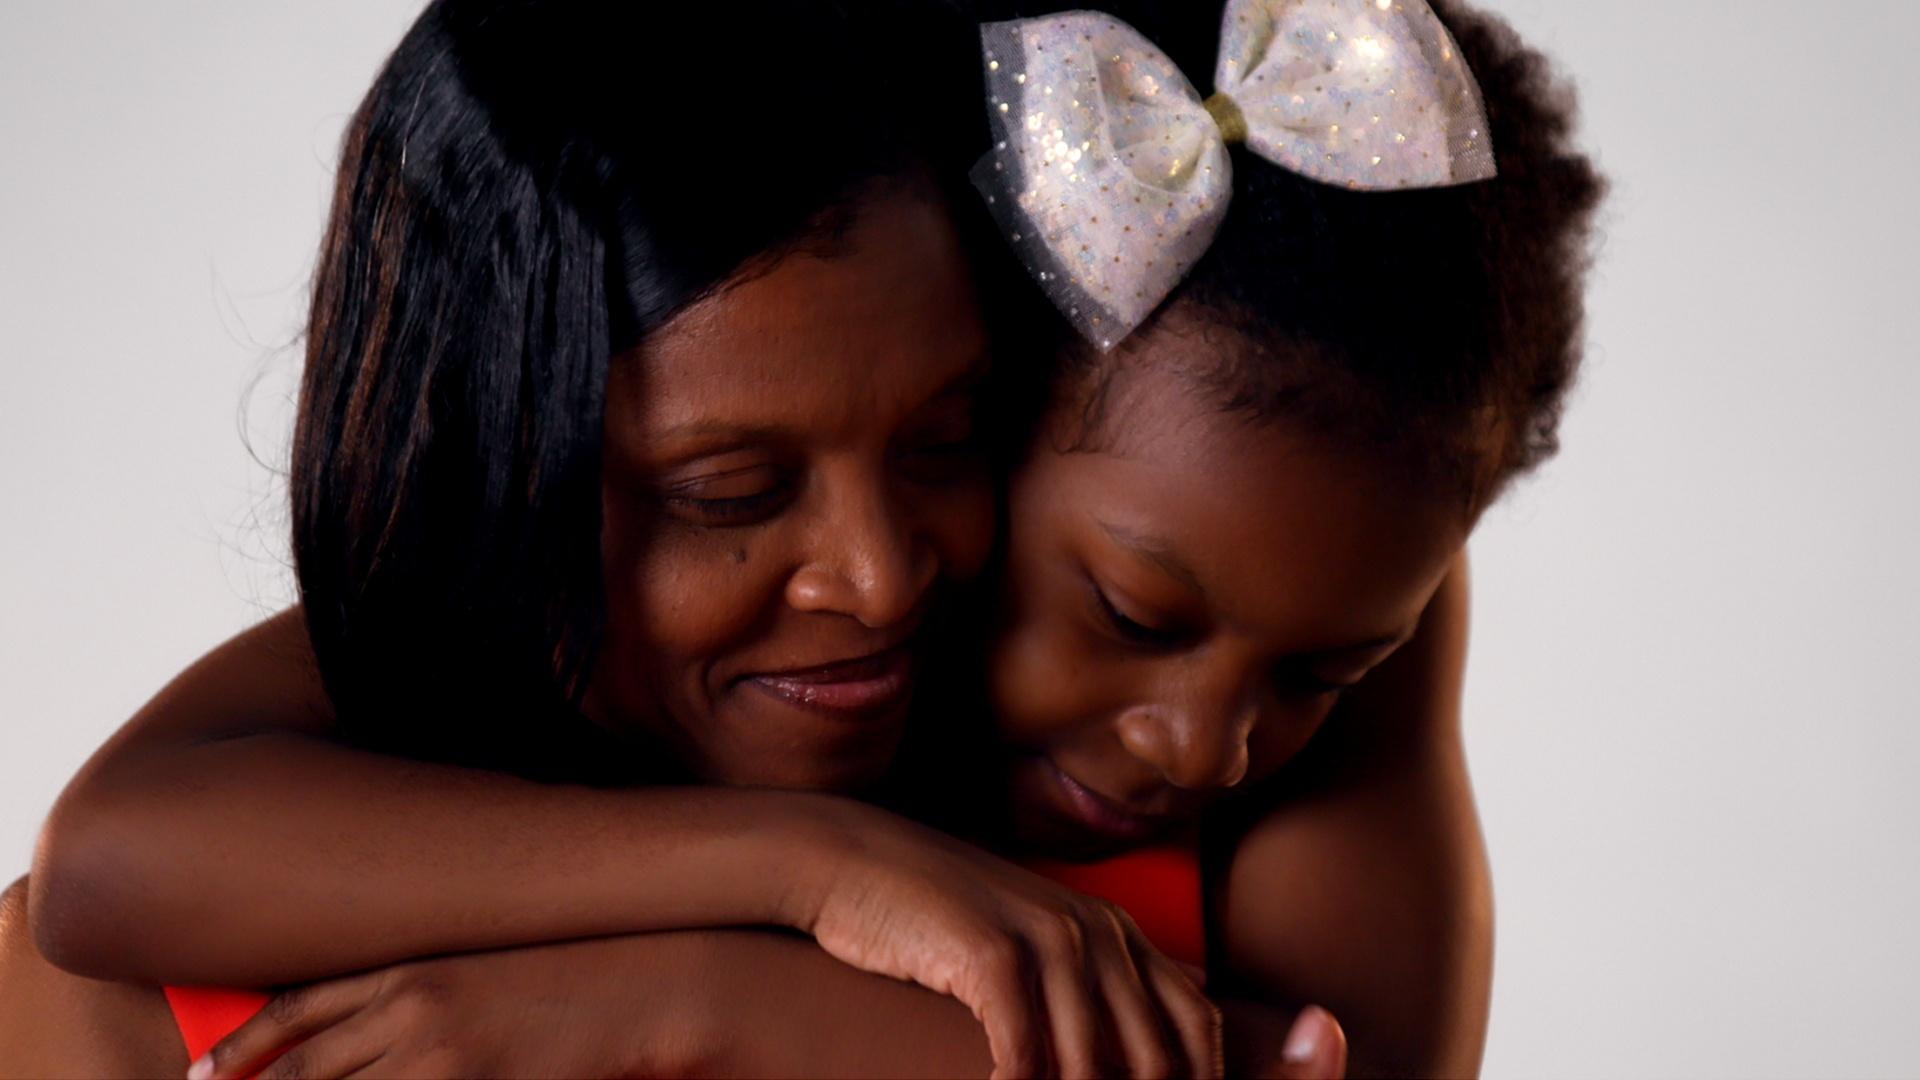 A young Black girl is hugging a Black woman from behind. They are both smiling.